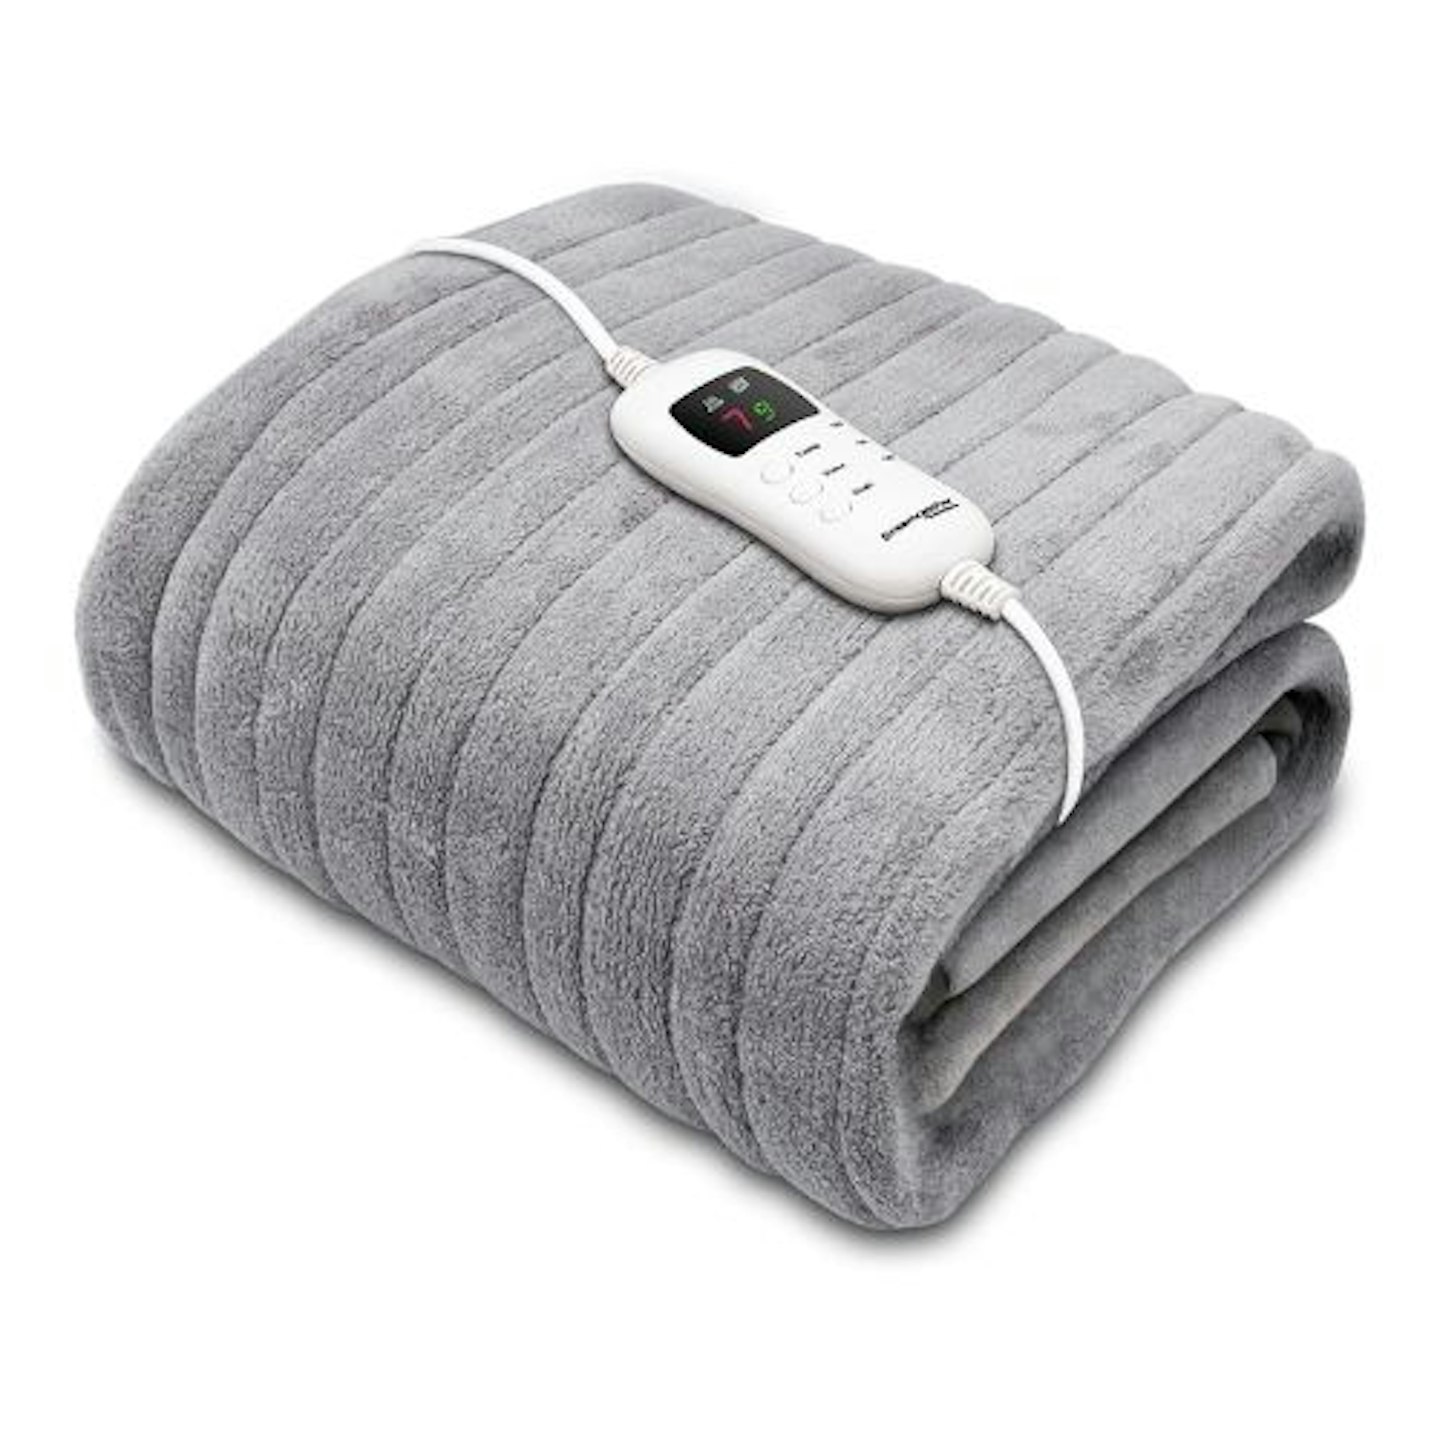 Dreamcatcher Electric Heated Throw Blanket 160 x 120cm, Machine Washable Soft Fleece Overblanket with Timer and 9 Control Heat Settings Grey